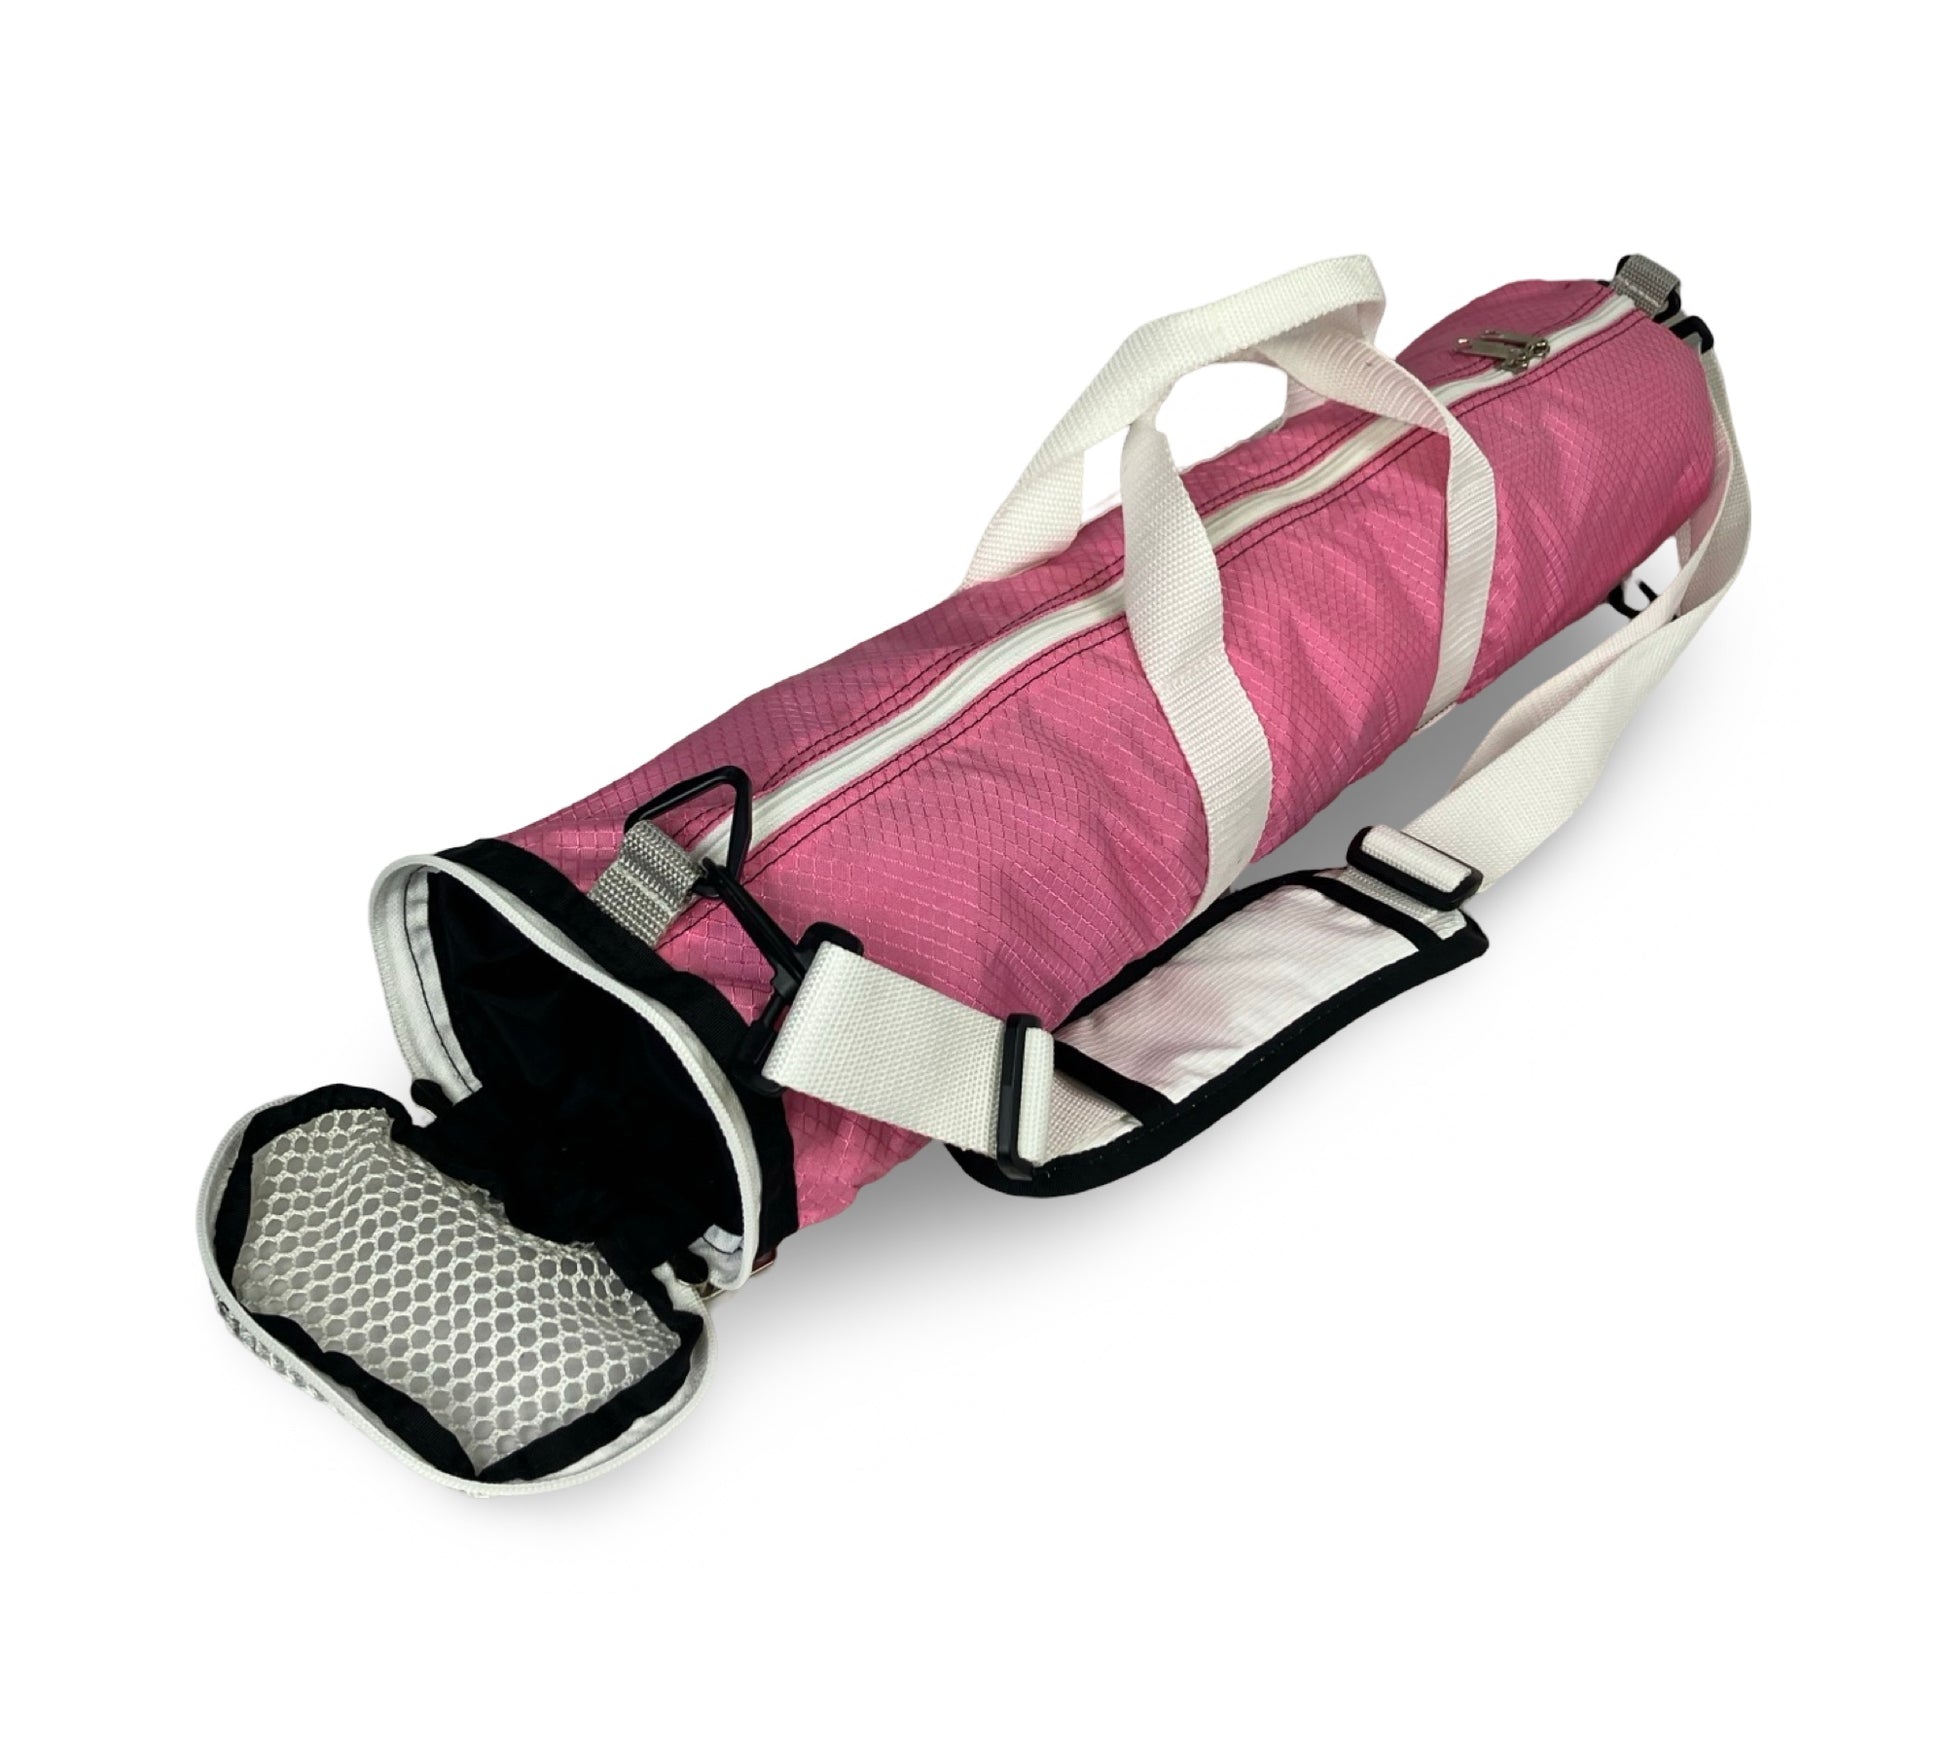 TYOGA Yoga Bag Luggage, by Tough Traveler. Made in USA since 1970